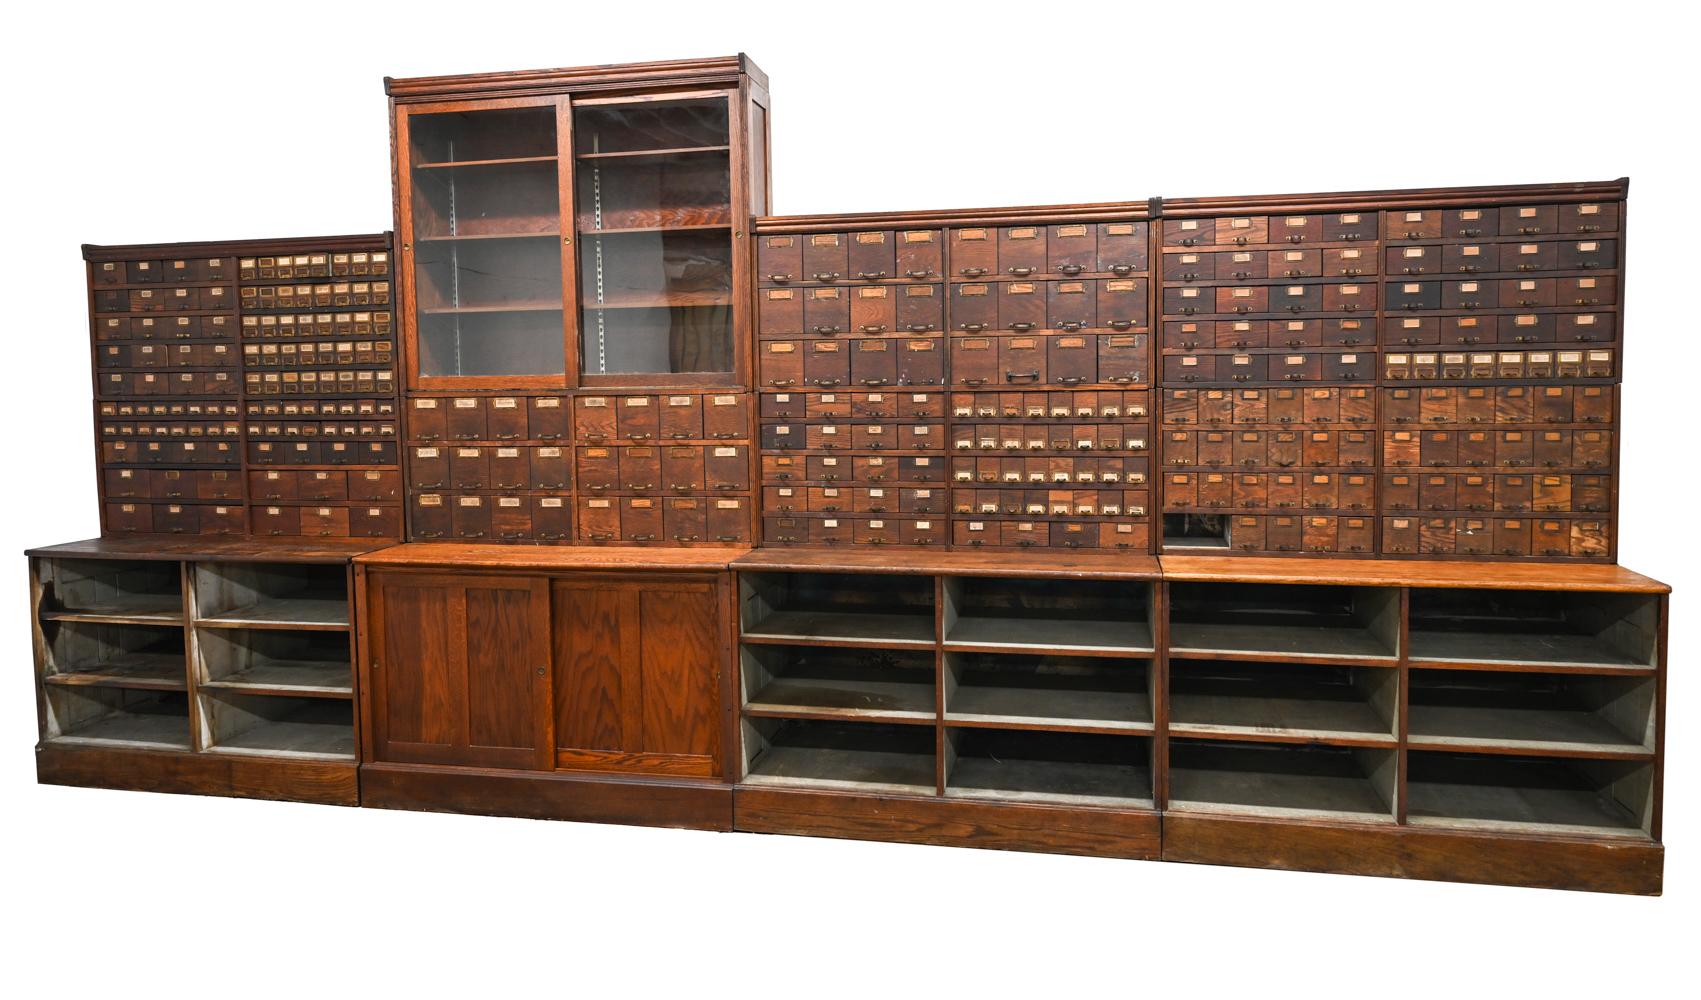 A fantastic, monumental oak wood wall unit ordered by Bradburn Bros. for an early Harley-Davidson dealership in Canandaigua, N.Y., c. 1900, for use in storing parts for repair of motorcycles and bicycles. 
This impressive cabinet was made by